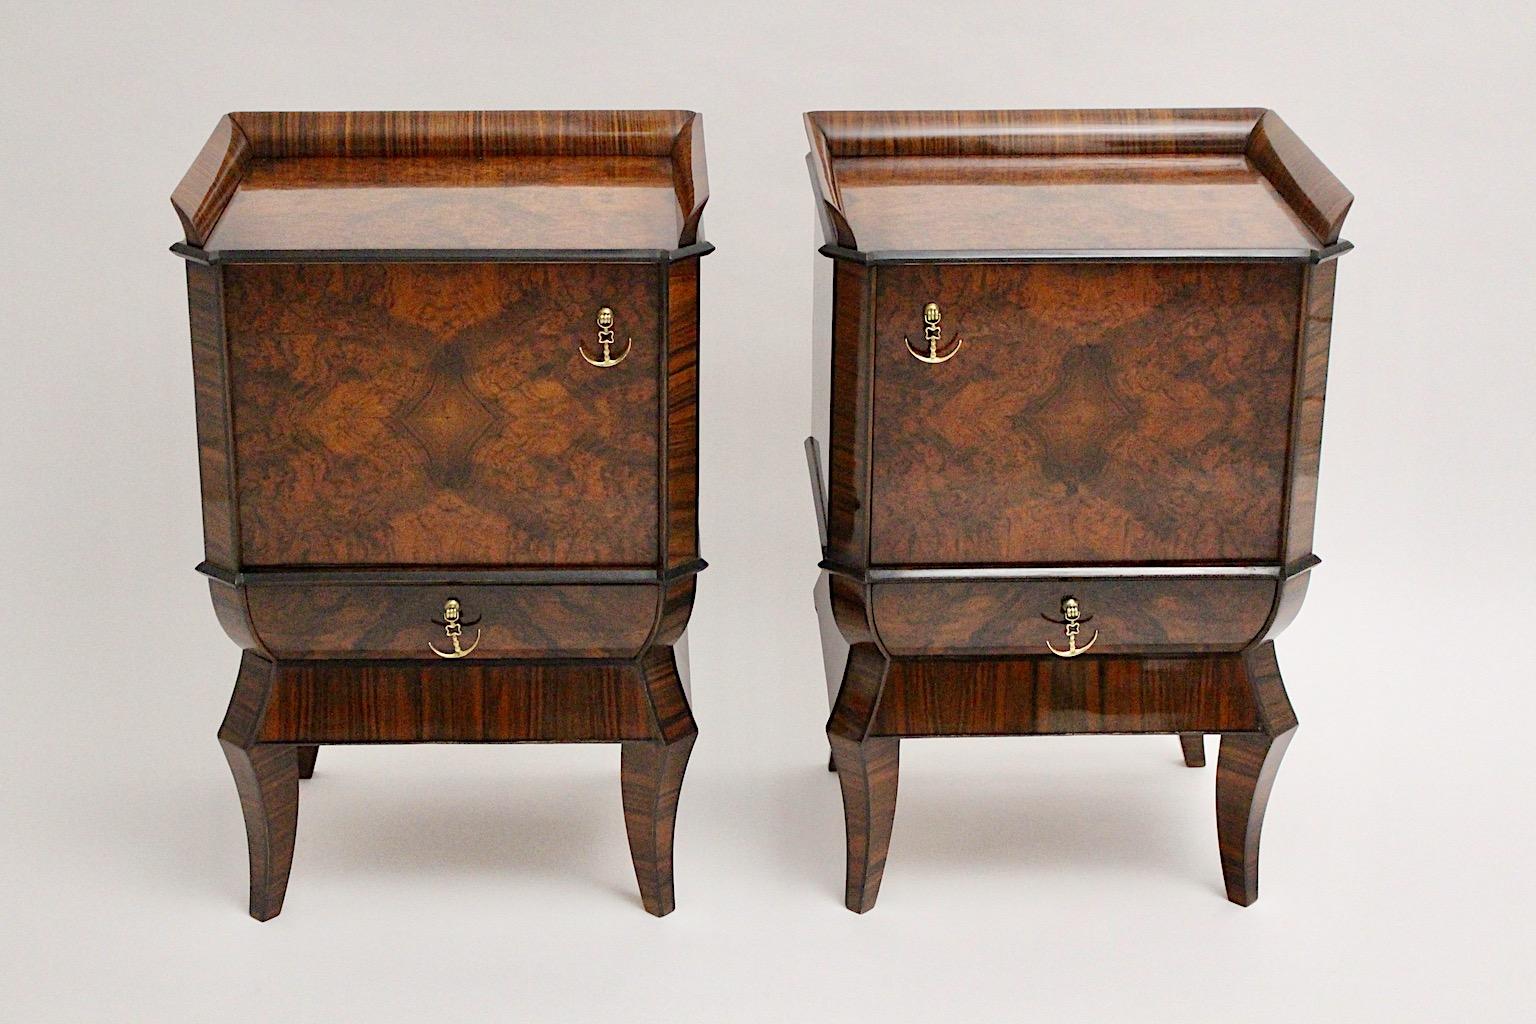 Art Deco vintage pair of nightstand or chests from walnut pagoda - like designed circa 1925 Austria attributed to Hugo Gorge.
Hugo Gorge ( 1883 - 1934 ) was a popular designer and architect in the
interwar period for domestic culture and featured